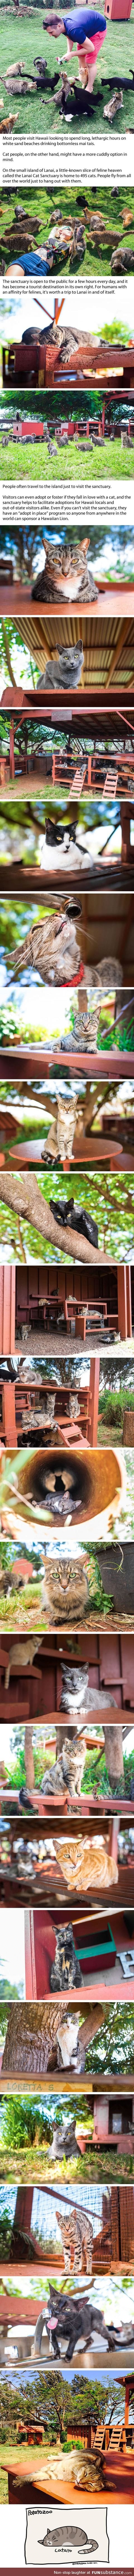 Cuddle 500 kitties at this heavenly cat sanctuary in hawaii